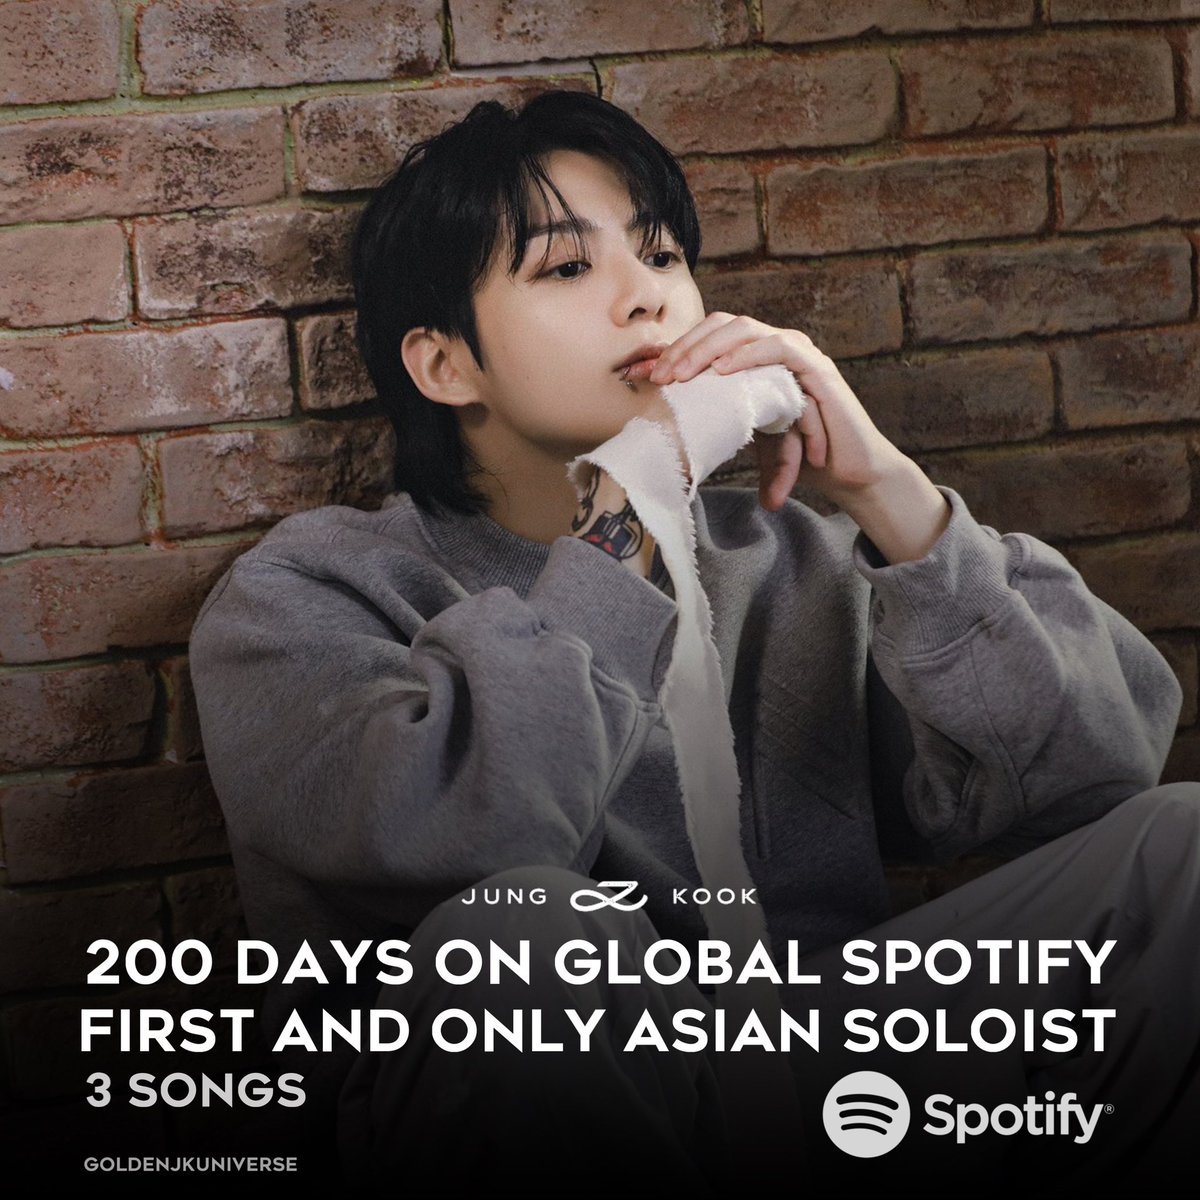 3D by Jungkook has now spent 200 days charting on Global Spotify, this being Jungkook’s 3rd song to do so. He is the first and only Asian soloist to ever achieve this. Golden is also the first studio album by an Asian act to have multiple songs achieve this (Seven and 3D).